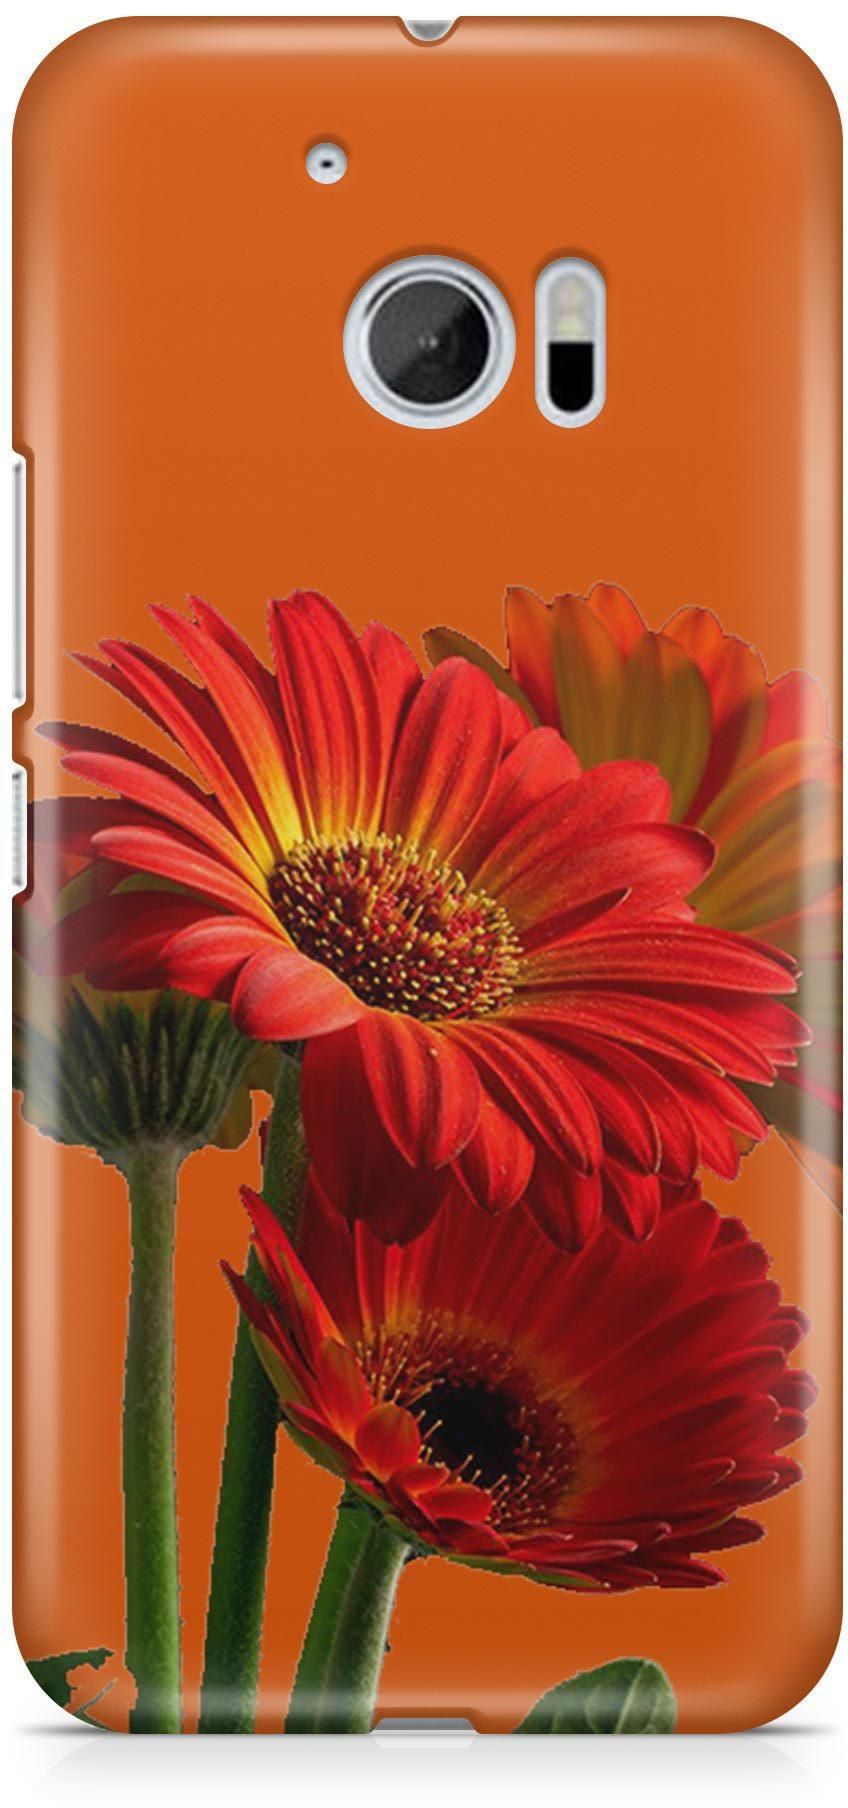 Red Burning Flower Phone Case Cover for HTC M10